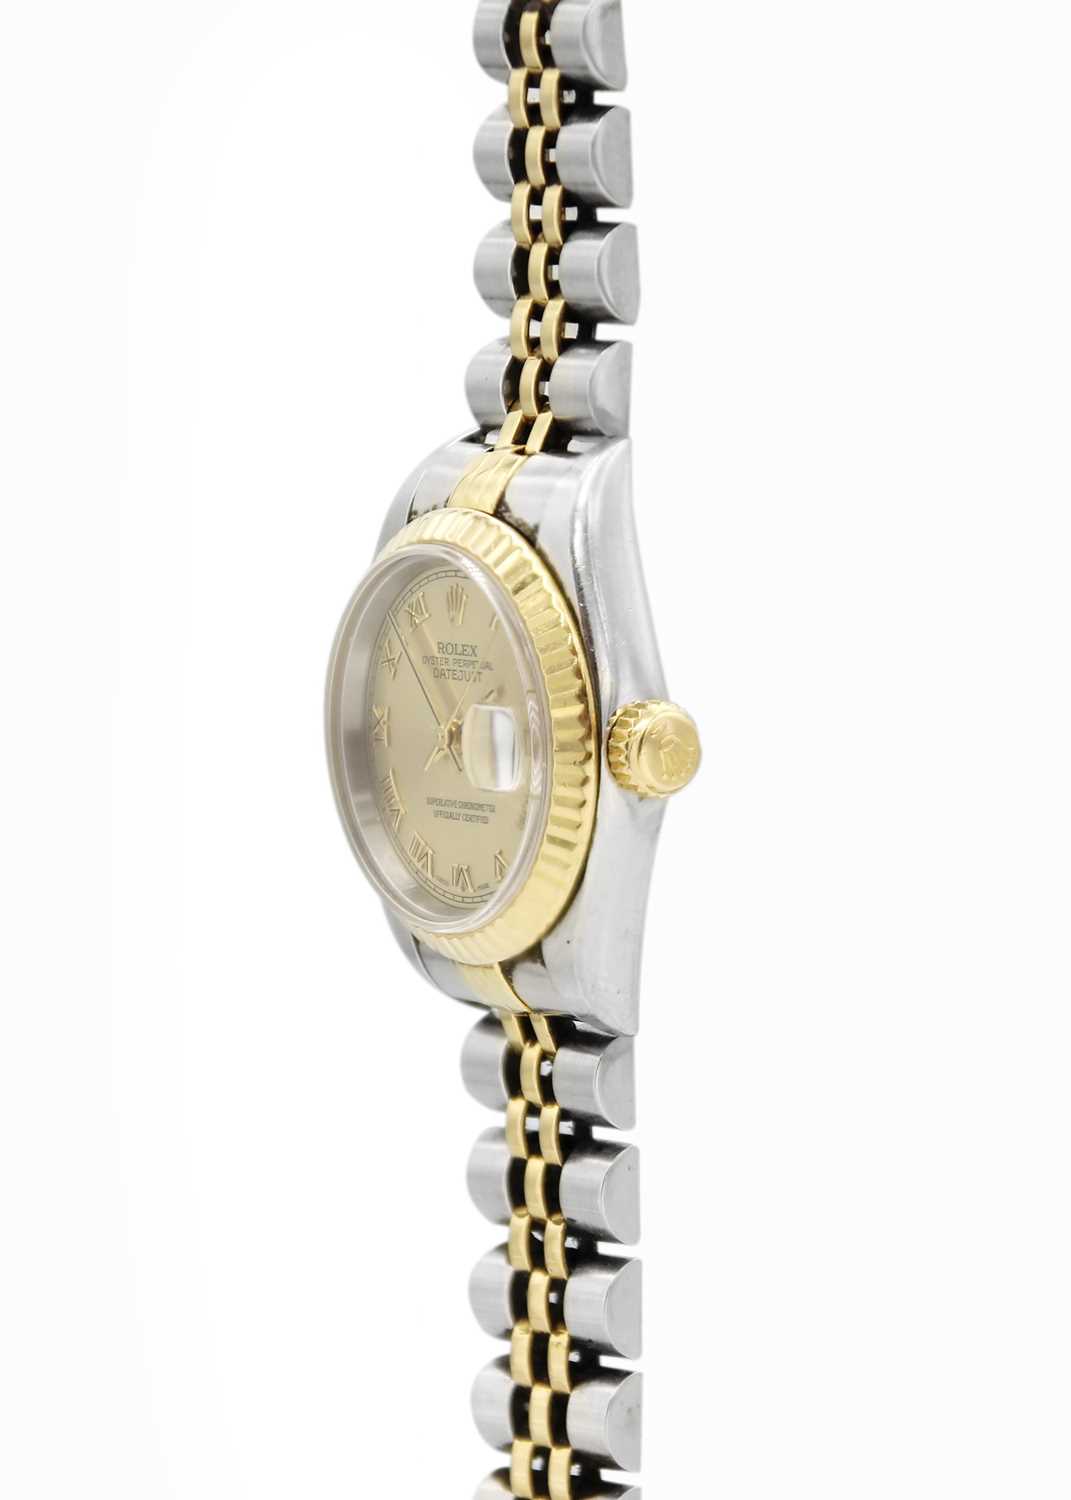 ROLEX - A Rolex Oyster Perpetual Datejust lady's gold and stainless steel bracelet wristwatch. - Image 2 of 8